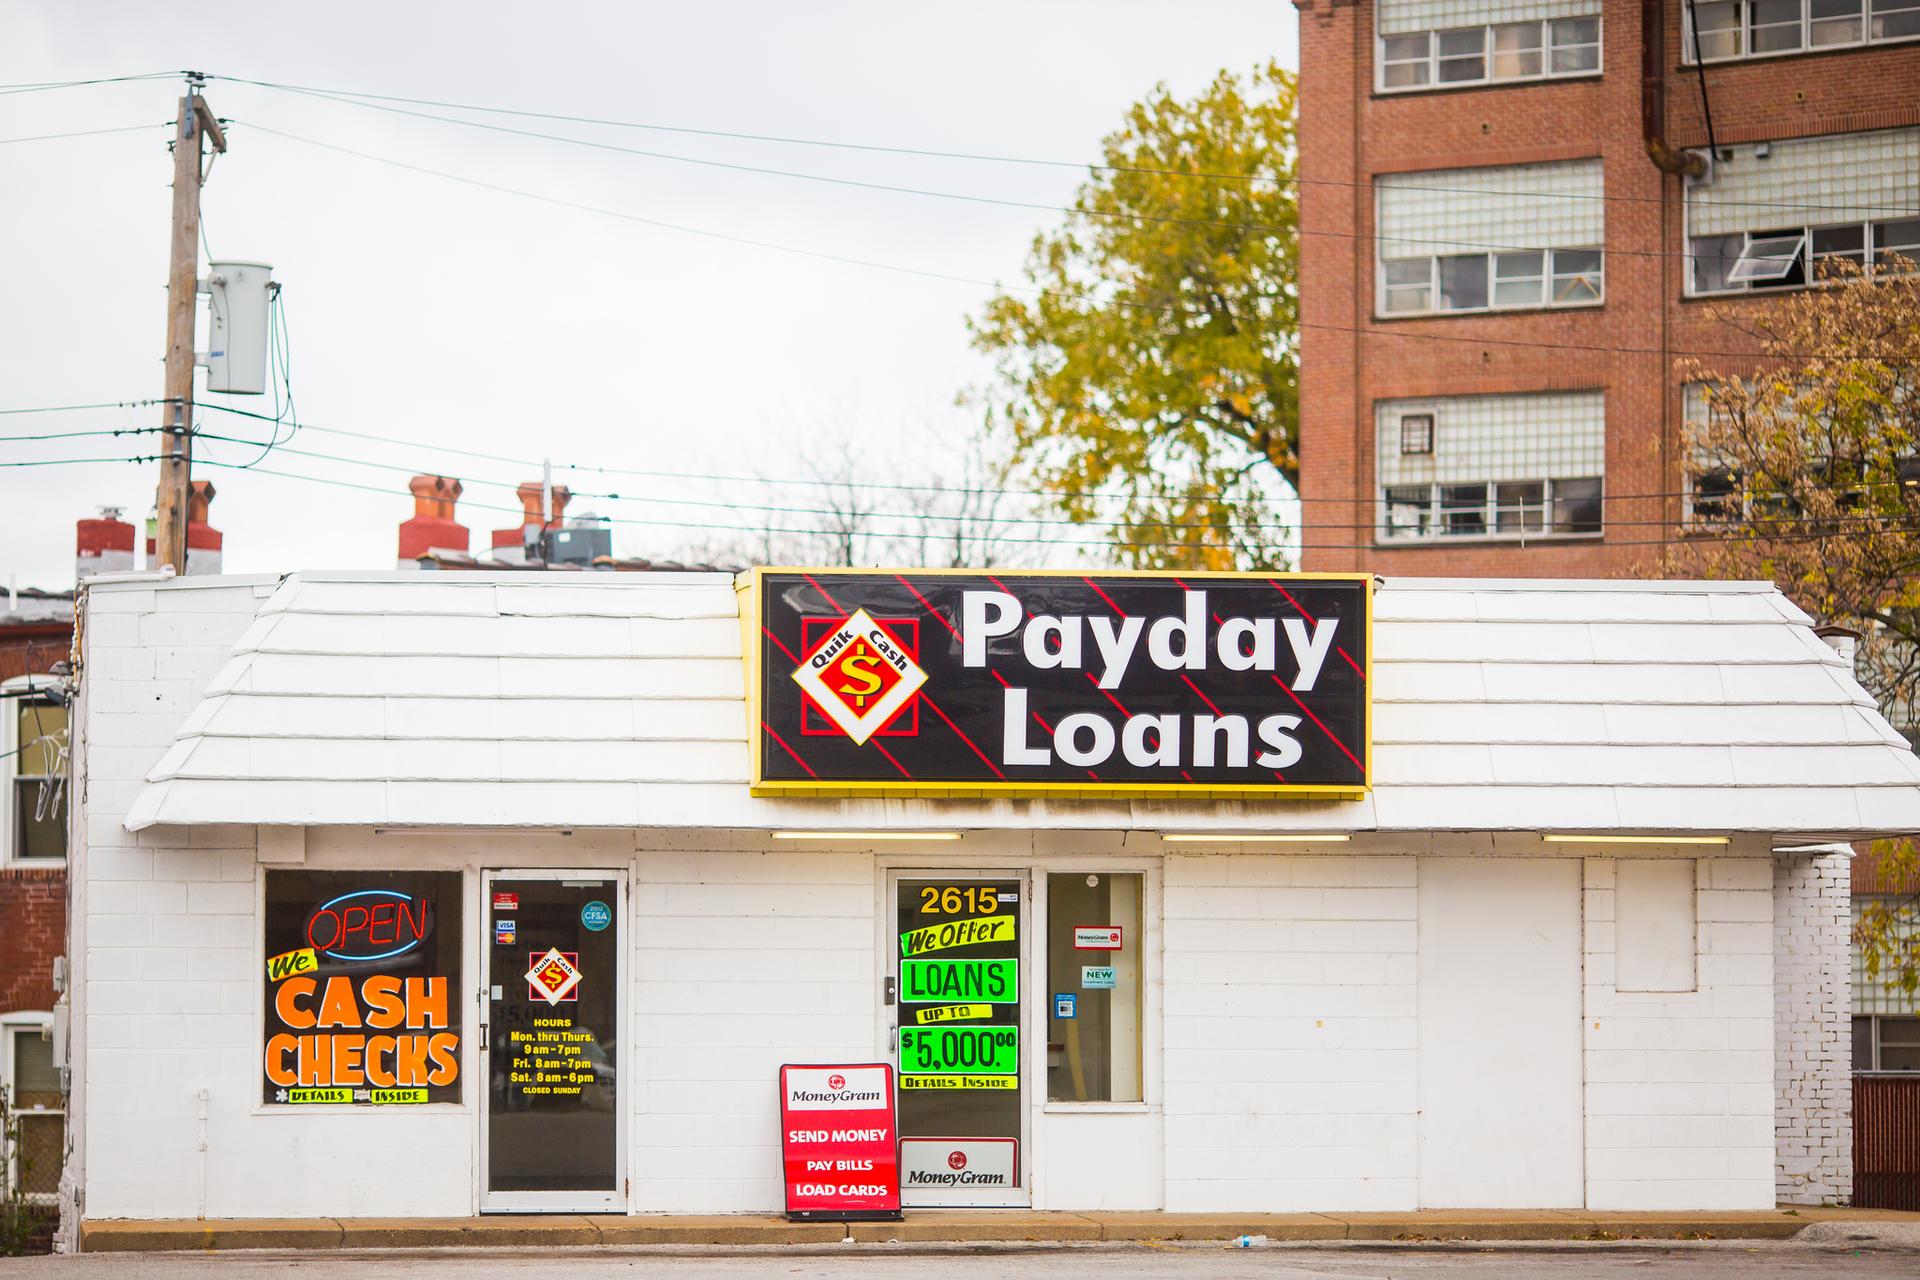 Payday Loan shop